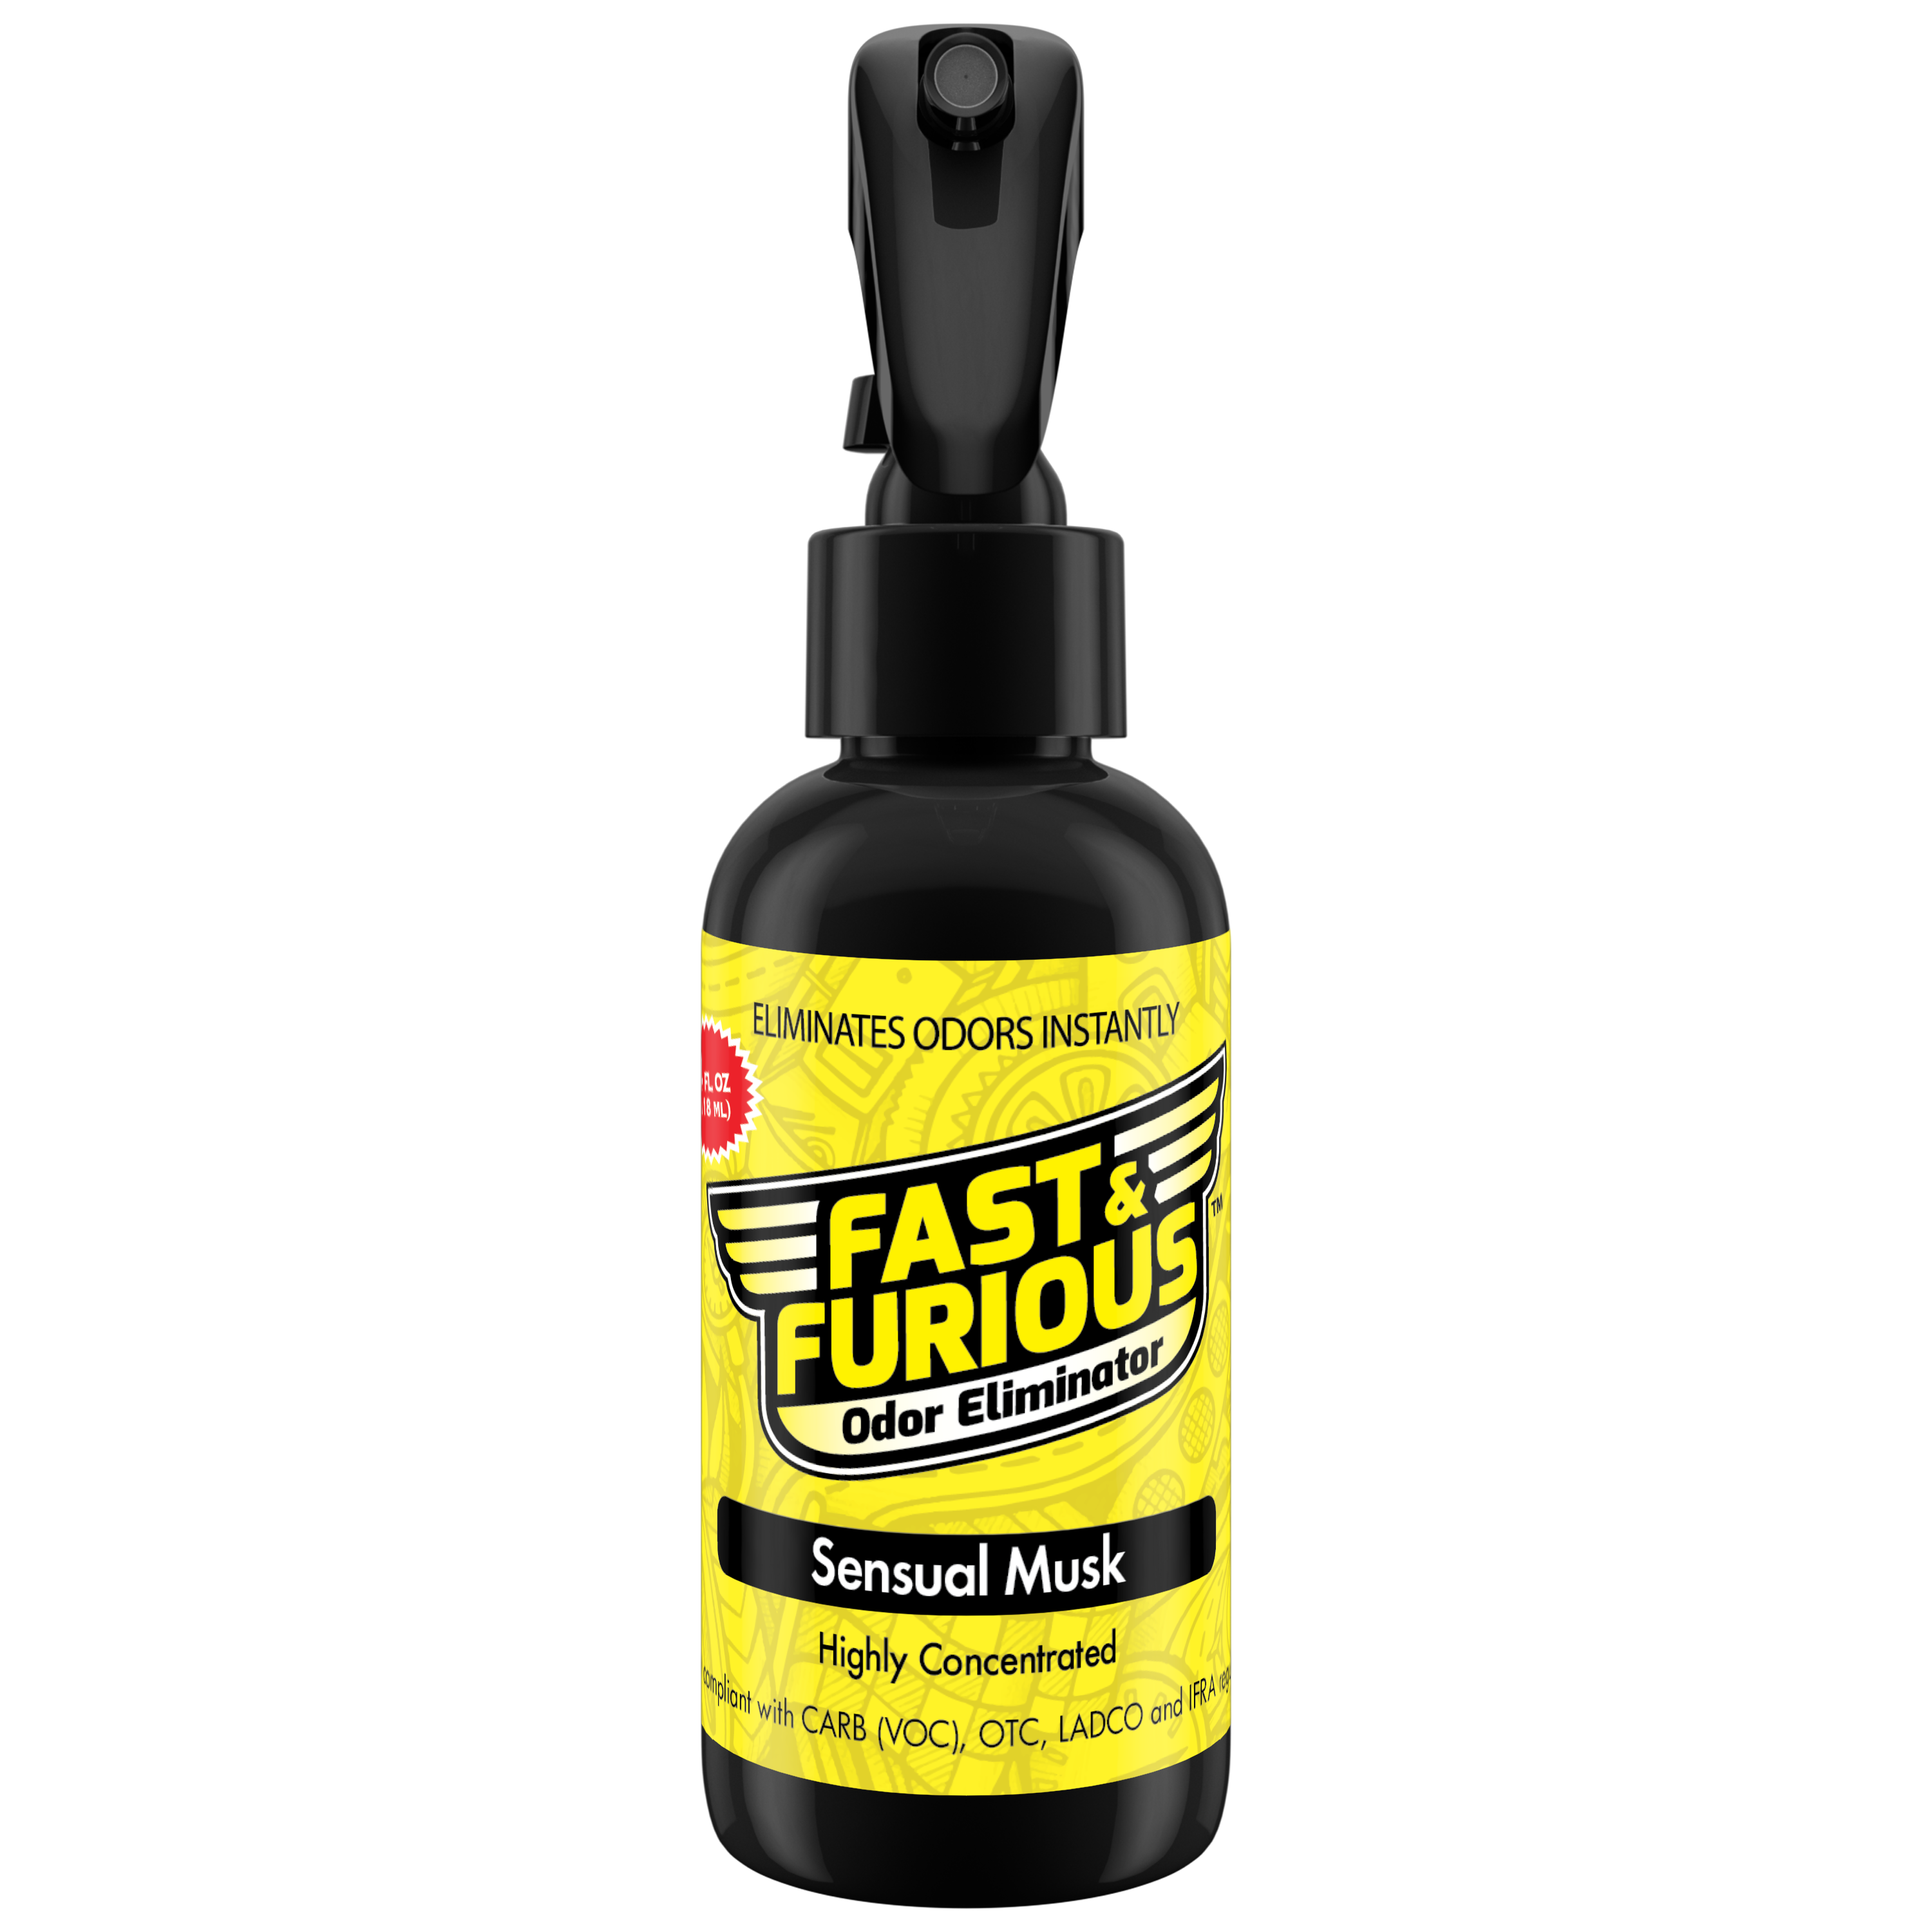 Fast and Furious Odor Eliminator - Sensual Musk Scent